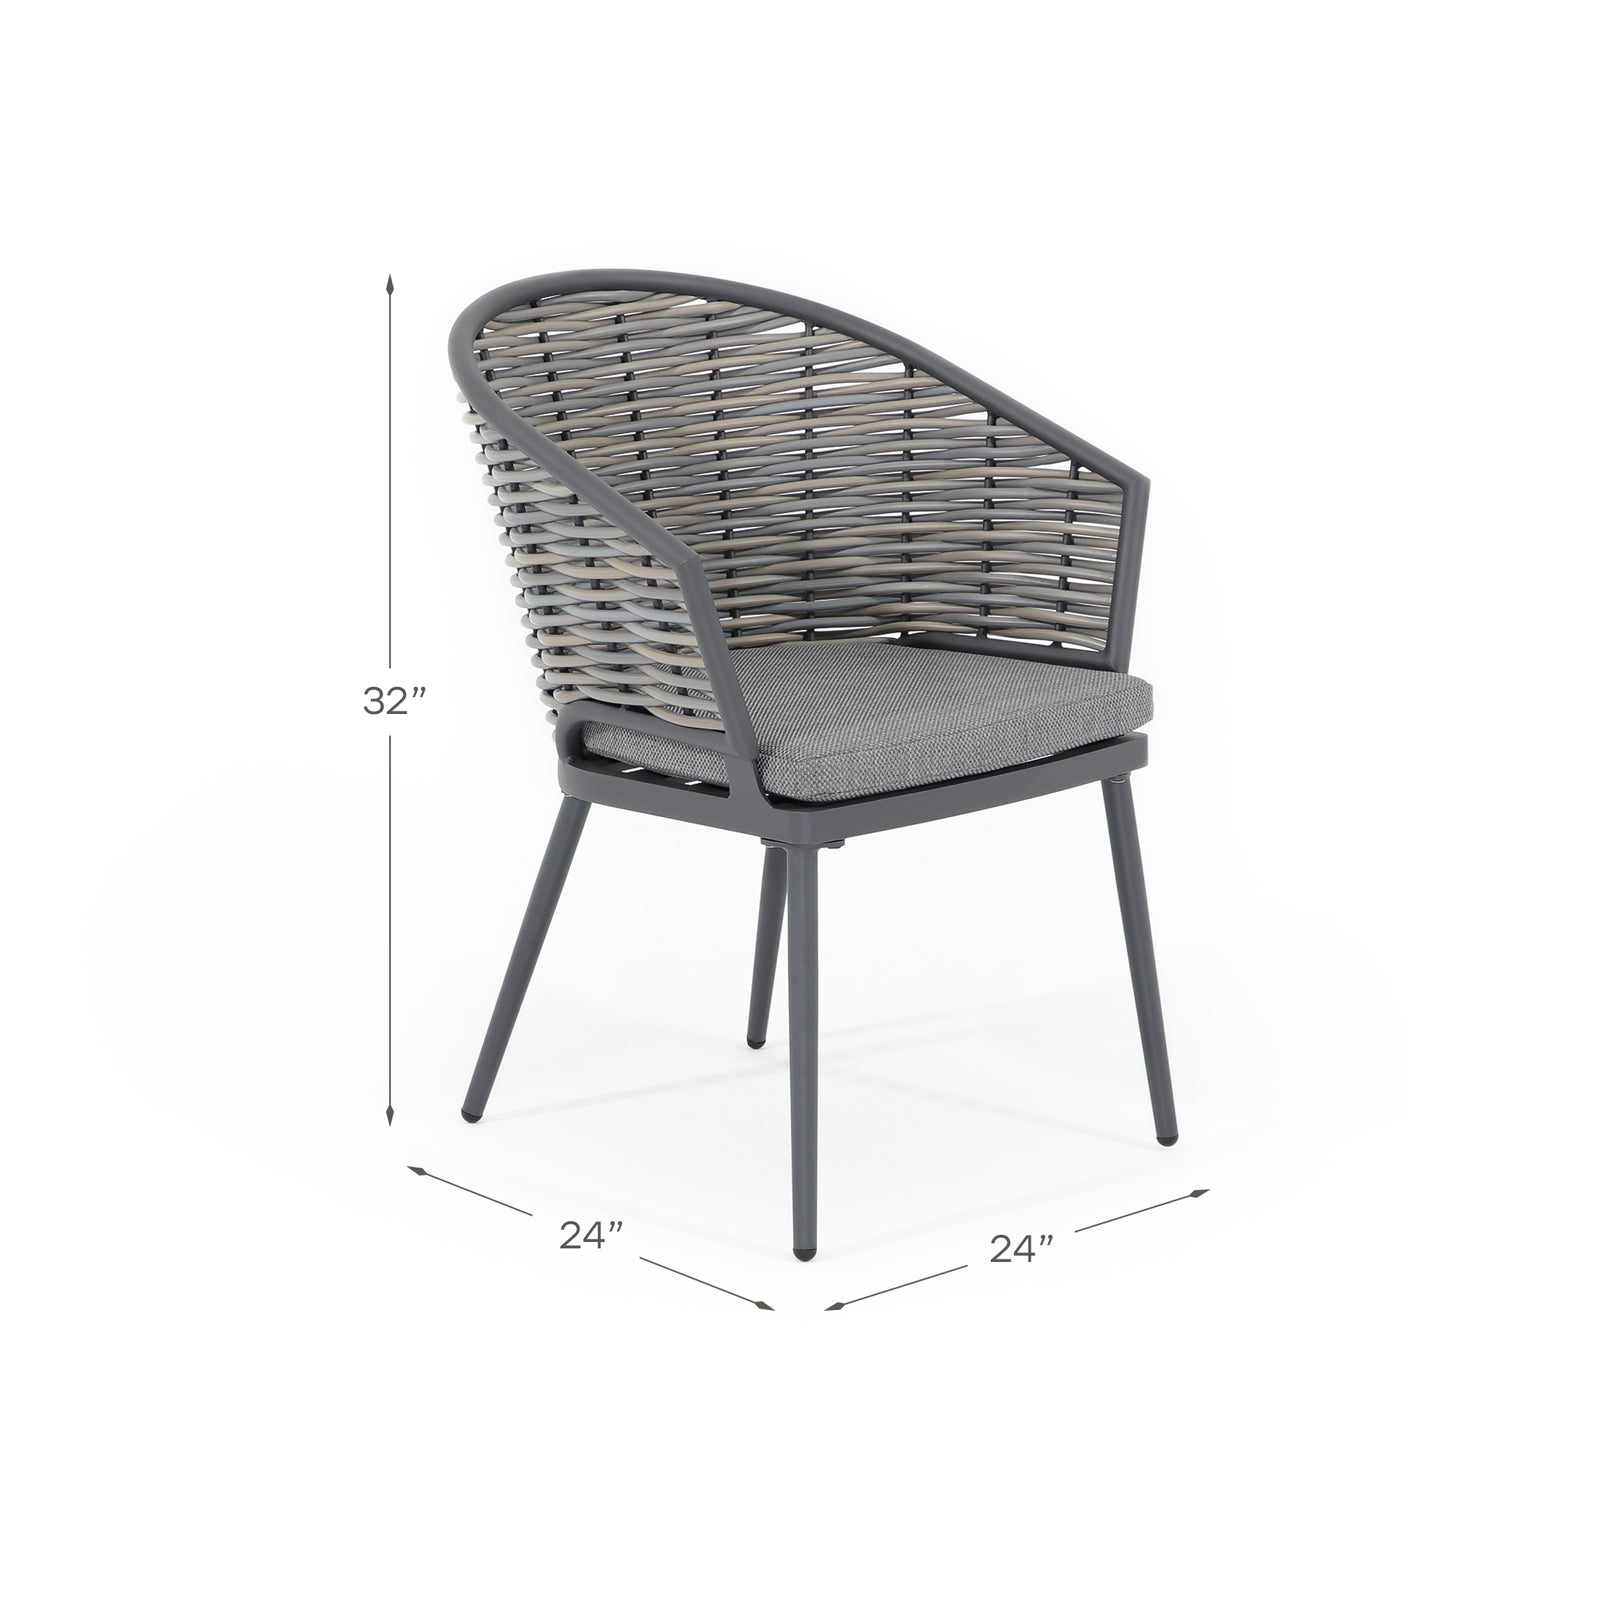 Burano Grey wicker outdoor dining chair with grey cushion-dimension information-Jardina Furniture